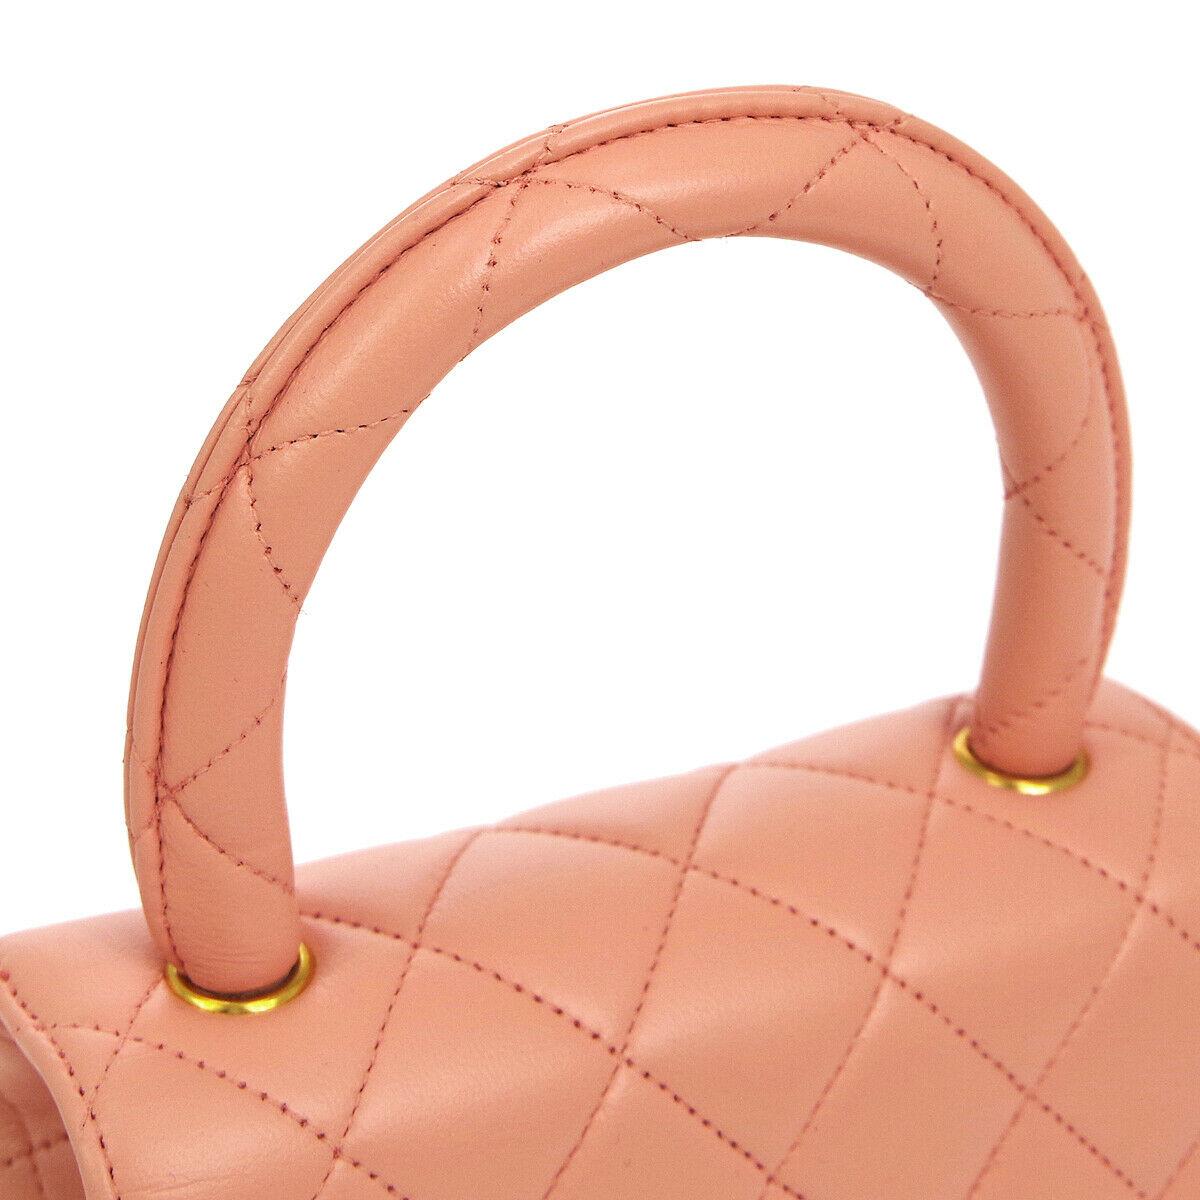 Chanel Baby Pink Leather Mini Kelly Small Party Evening Top Handle Satchel Flap Bag

Lambskin
Gold tone hardware
Turn lock closure
Leather lining
Made in France
Handle drop 3